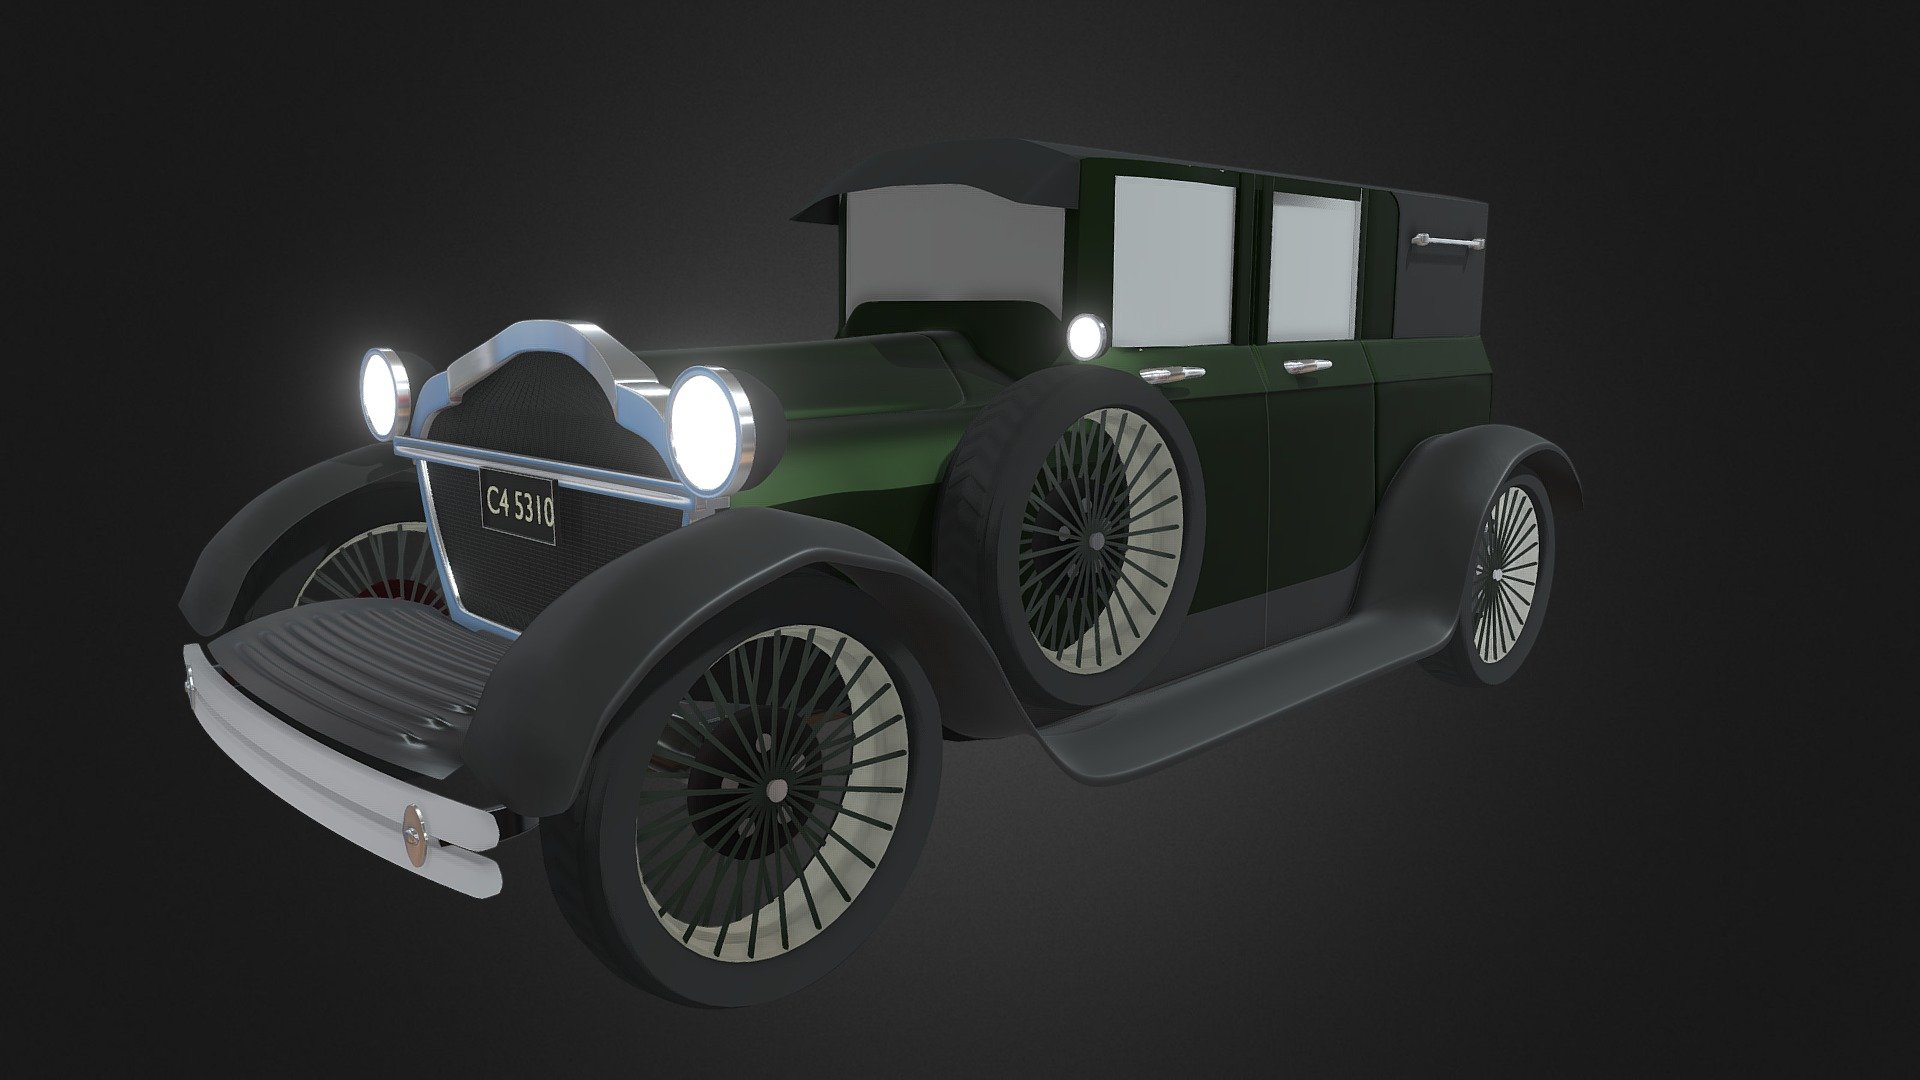 Willy knight cars [ Free download ]
Contact banjongtamchalet1234@gmail.com - Willys Knight Cars [ Free download ] - Download Free 3D model by AnakiAsuna 3d model